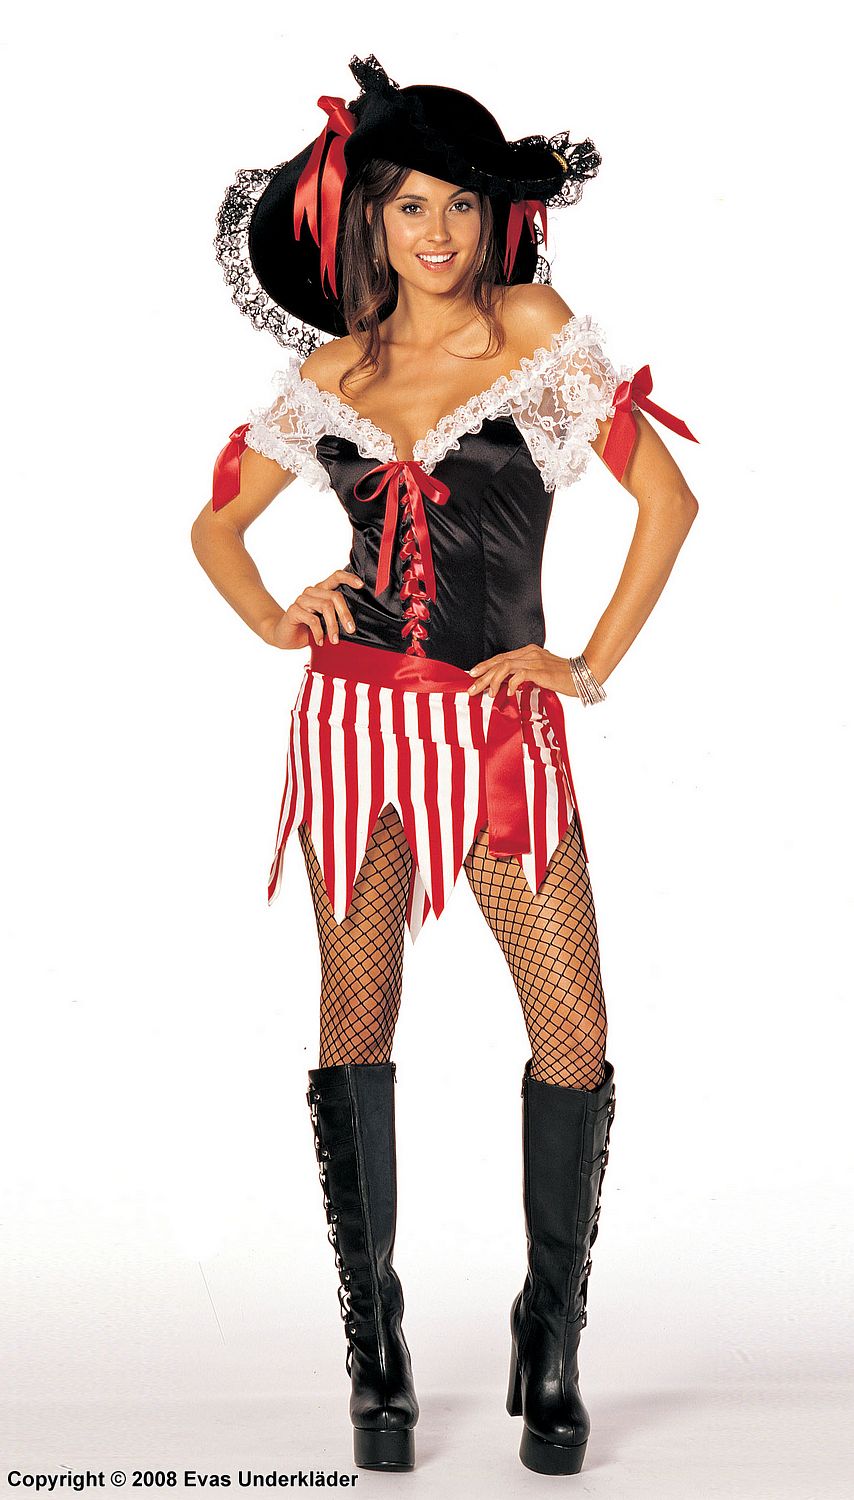 Pirate of the Carribean costume